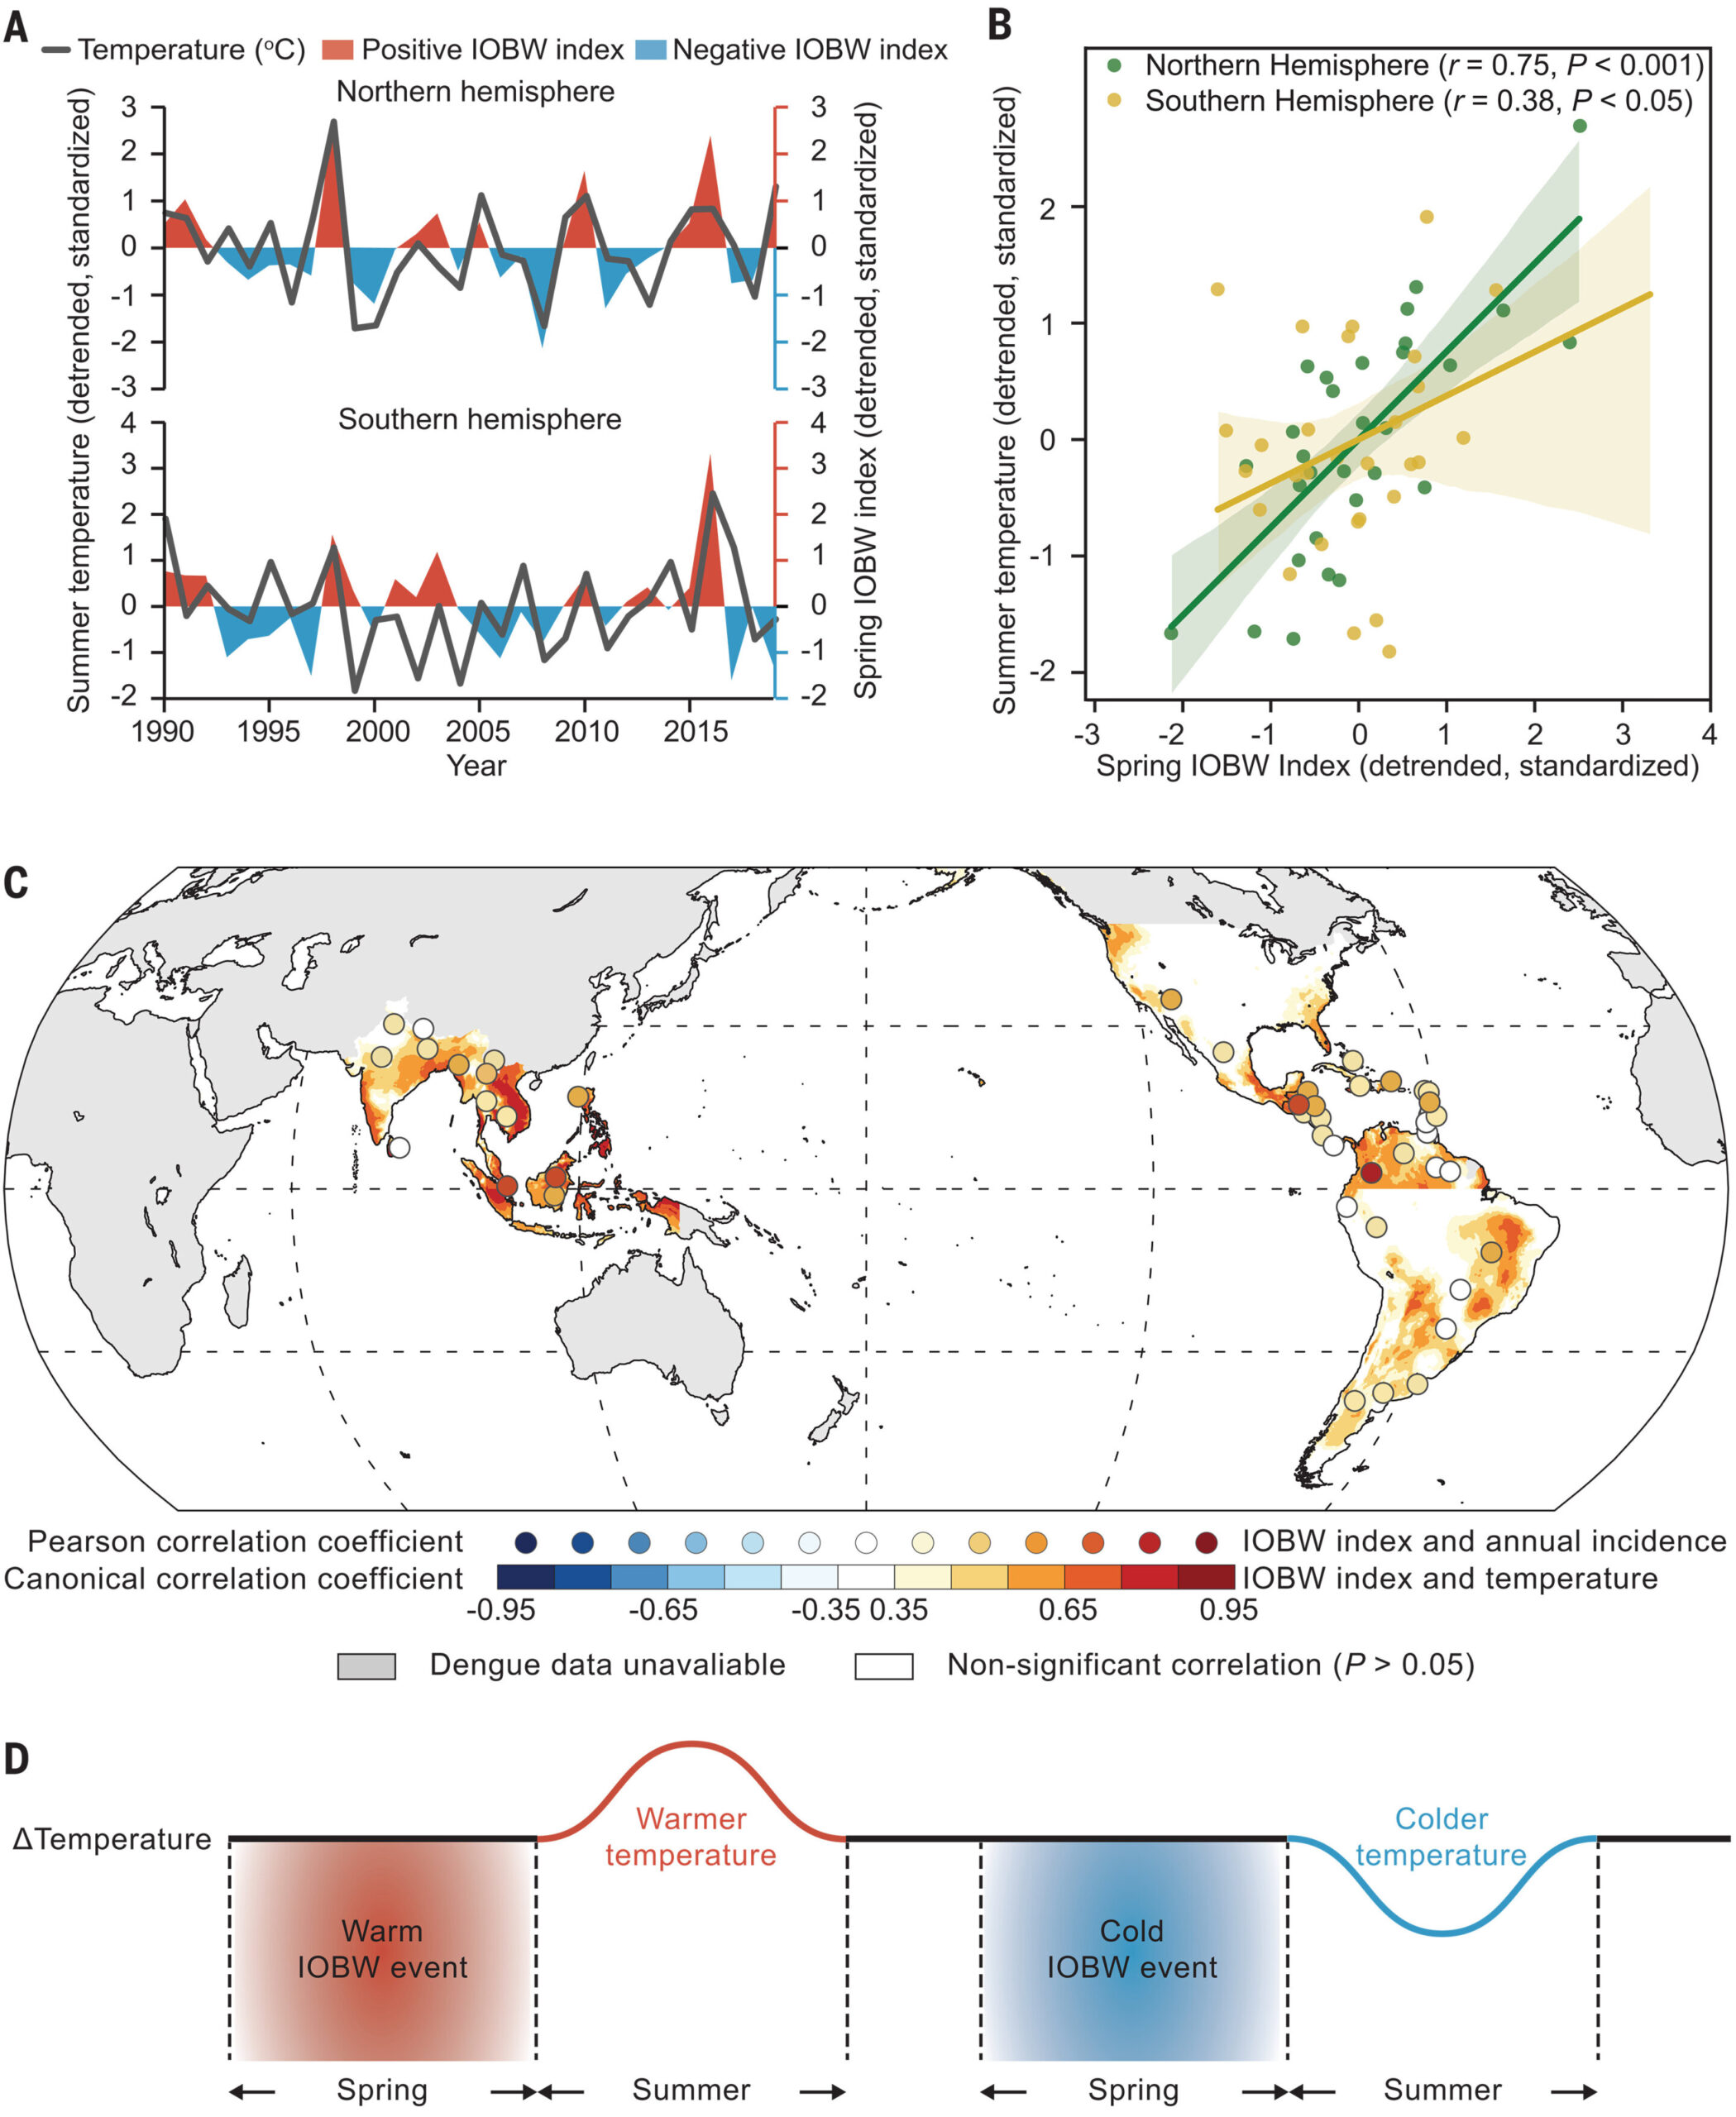 Indian Ocean sea-surface temperatures found to be accurate predictor of dengue outbreaks